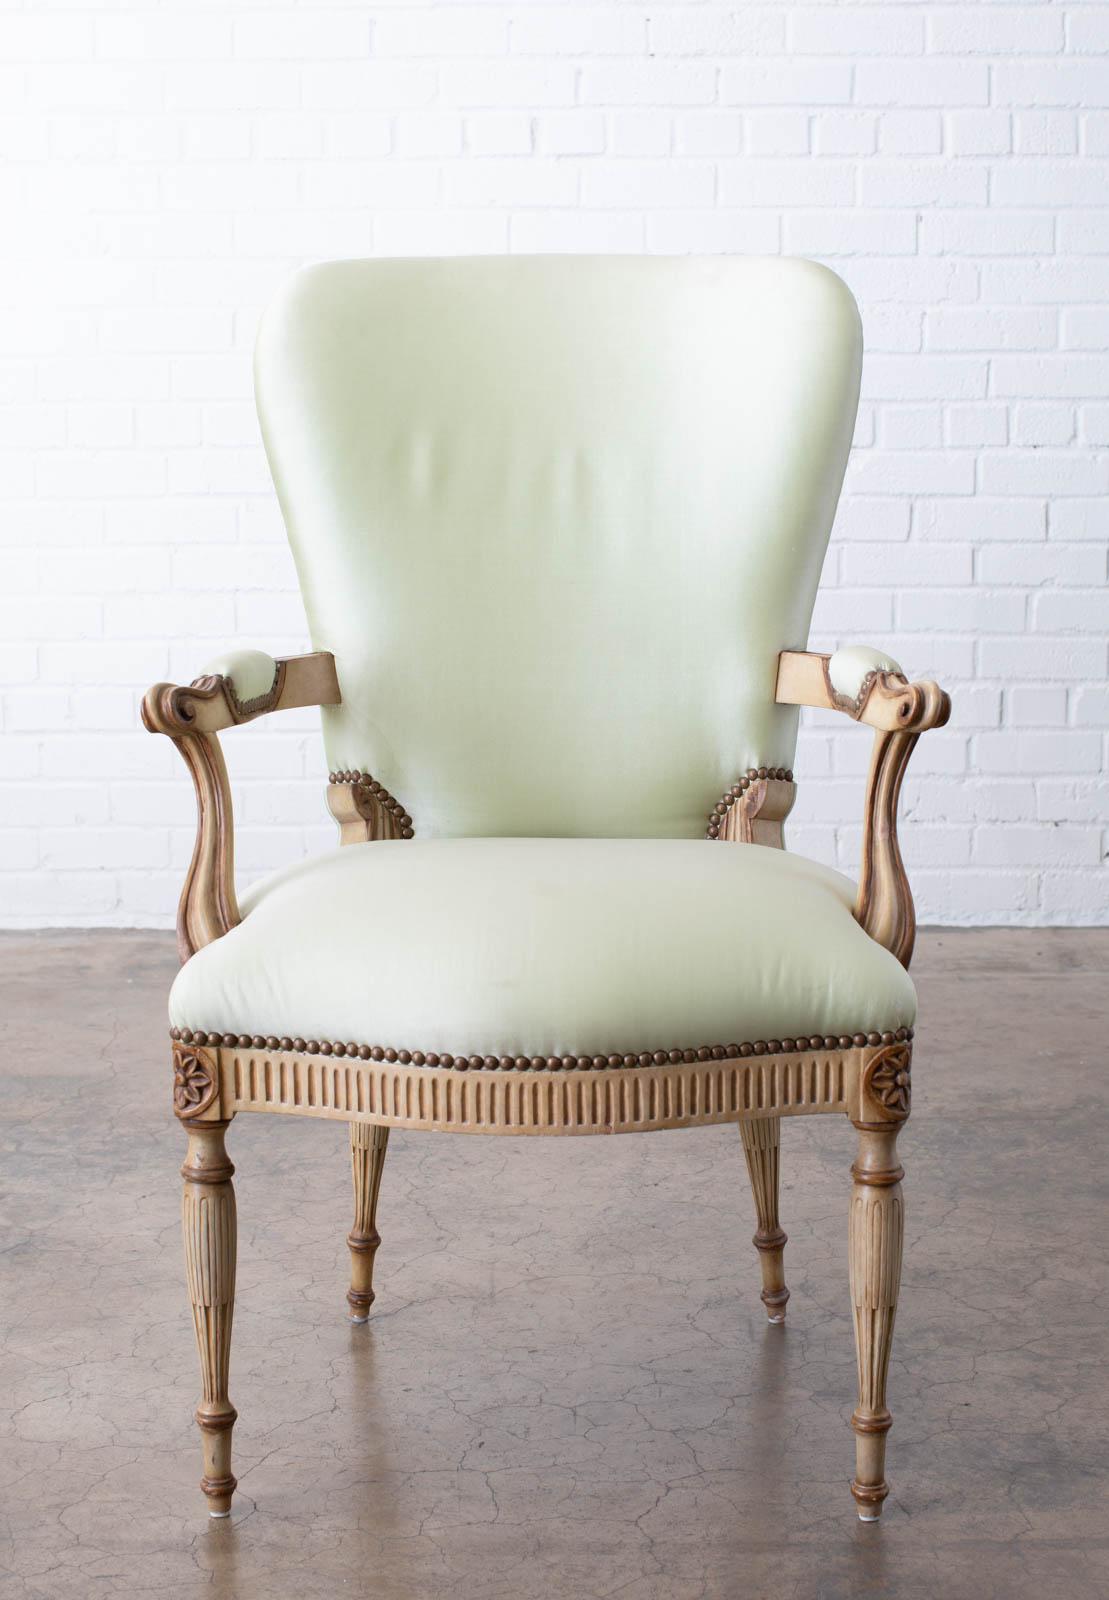 Handsome French style carved fauteuil armchair designed by Michael Taylor. Features a round barrel shaped back with subtle wings. The flat padded arms end with scrolls and gently curve down to the seat. The seat is decorated with rosettes on the